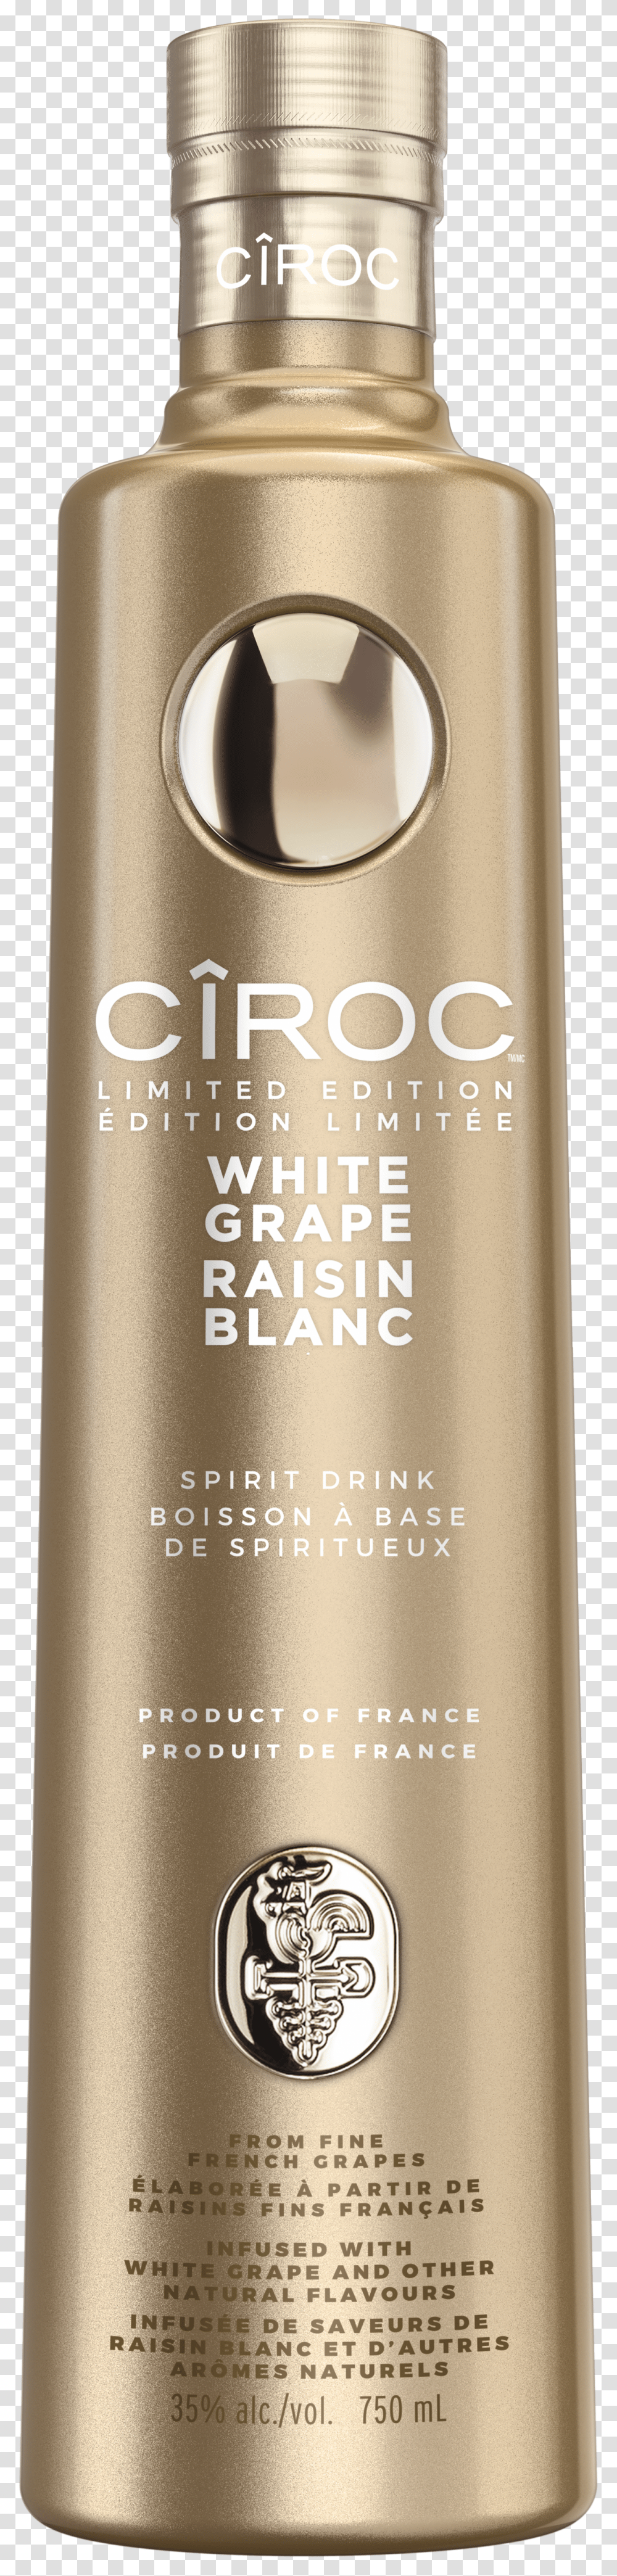 Ciroc White Grape Bottle Can Blond Transparent Png